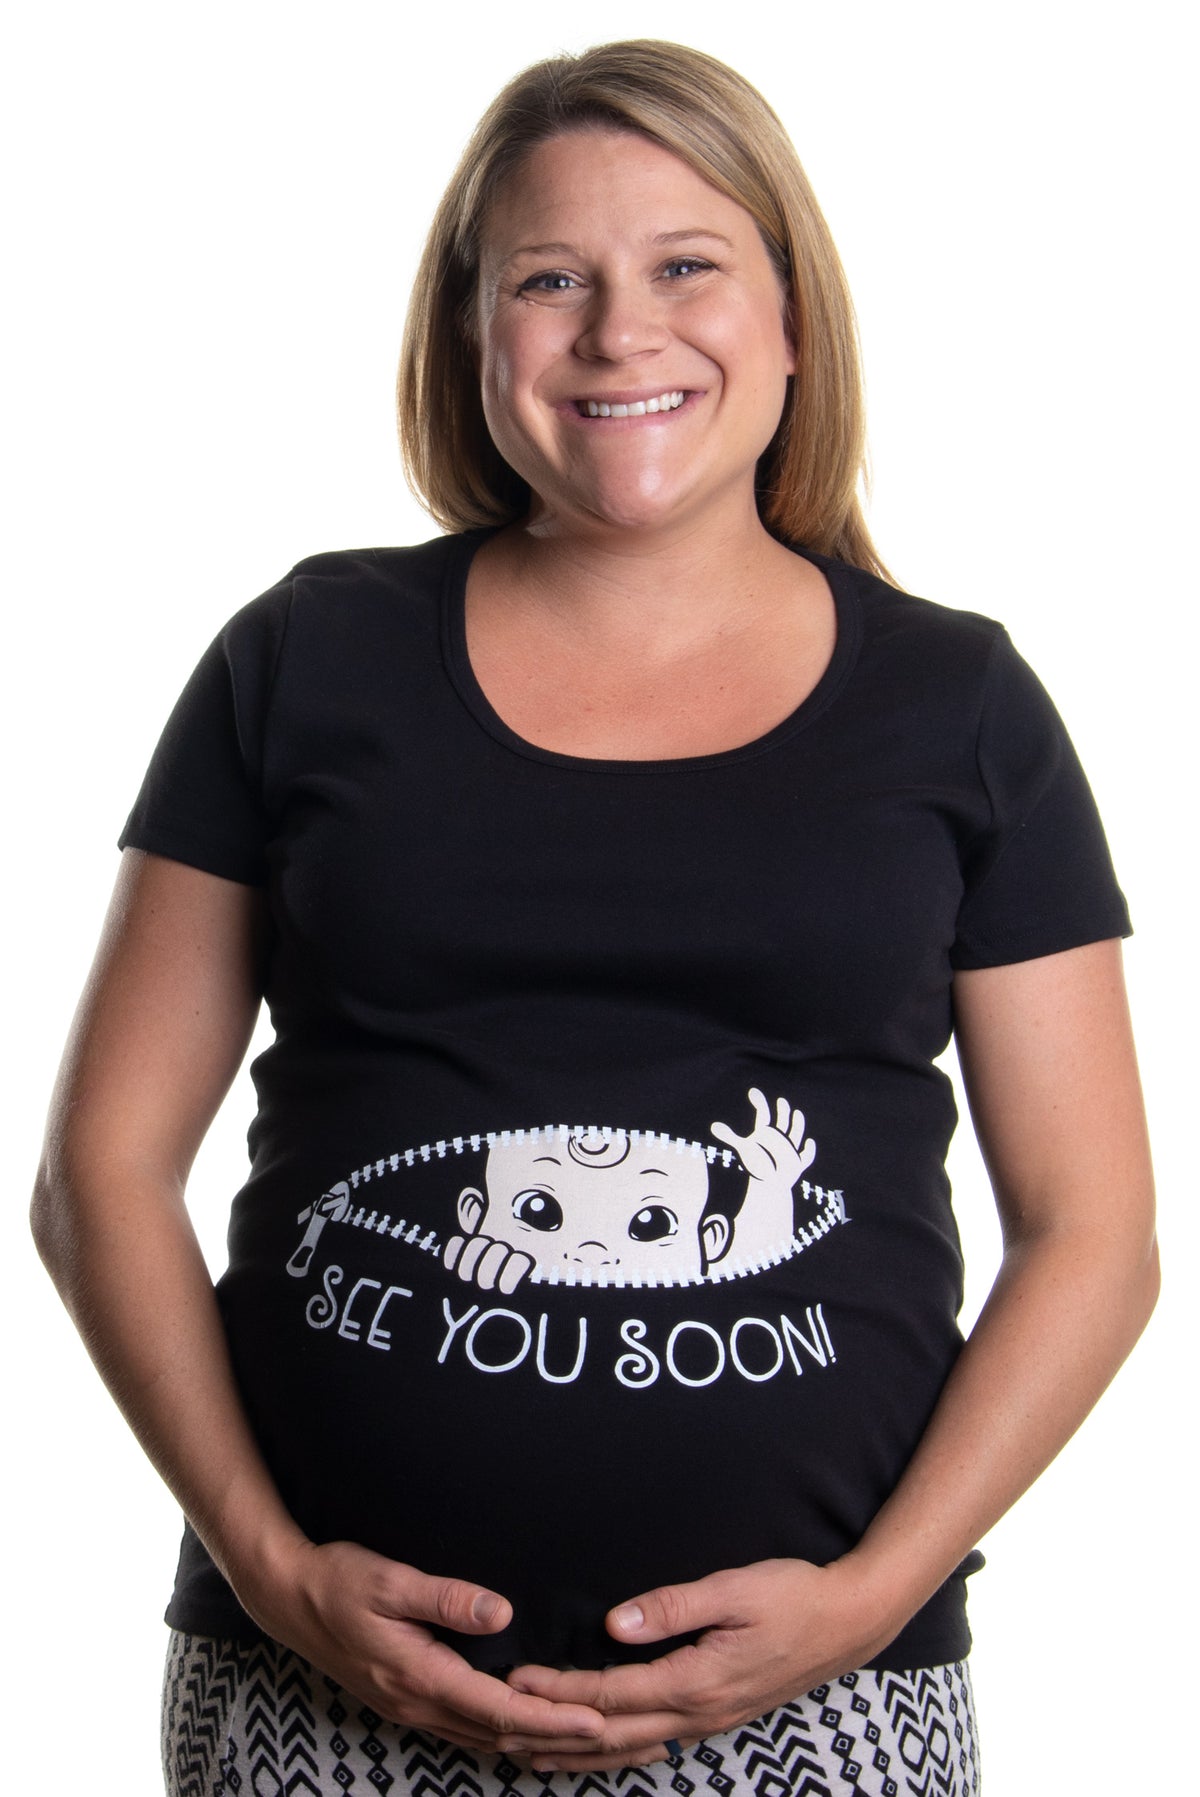 "See You Soon!" - Cute Funny Maternity Top, Pregnancy Baby Pregnant T-shirt - Women's